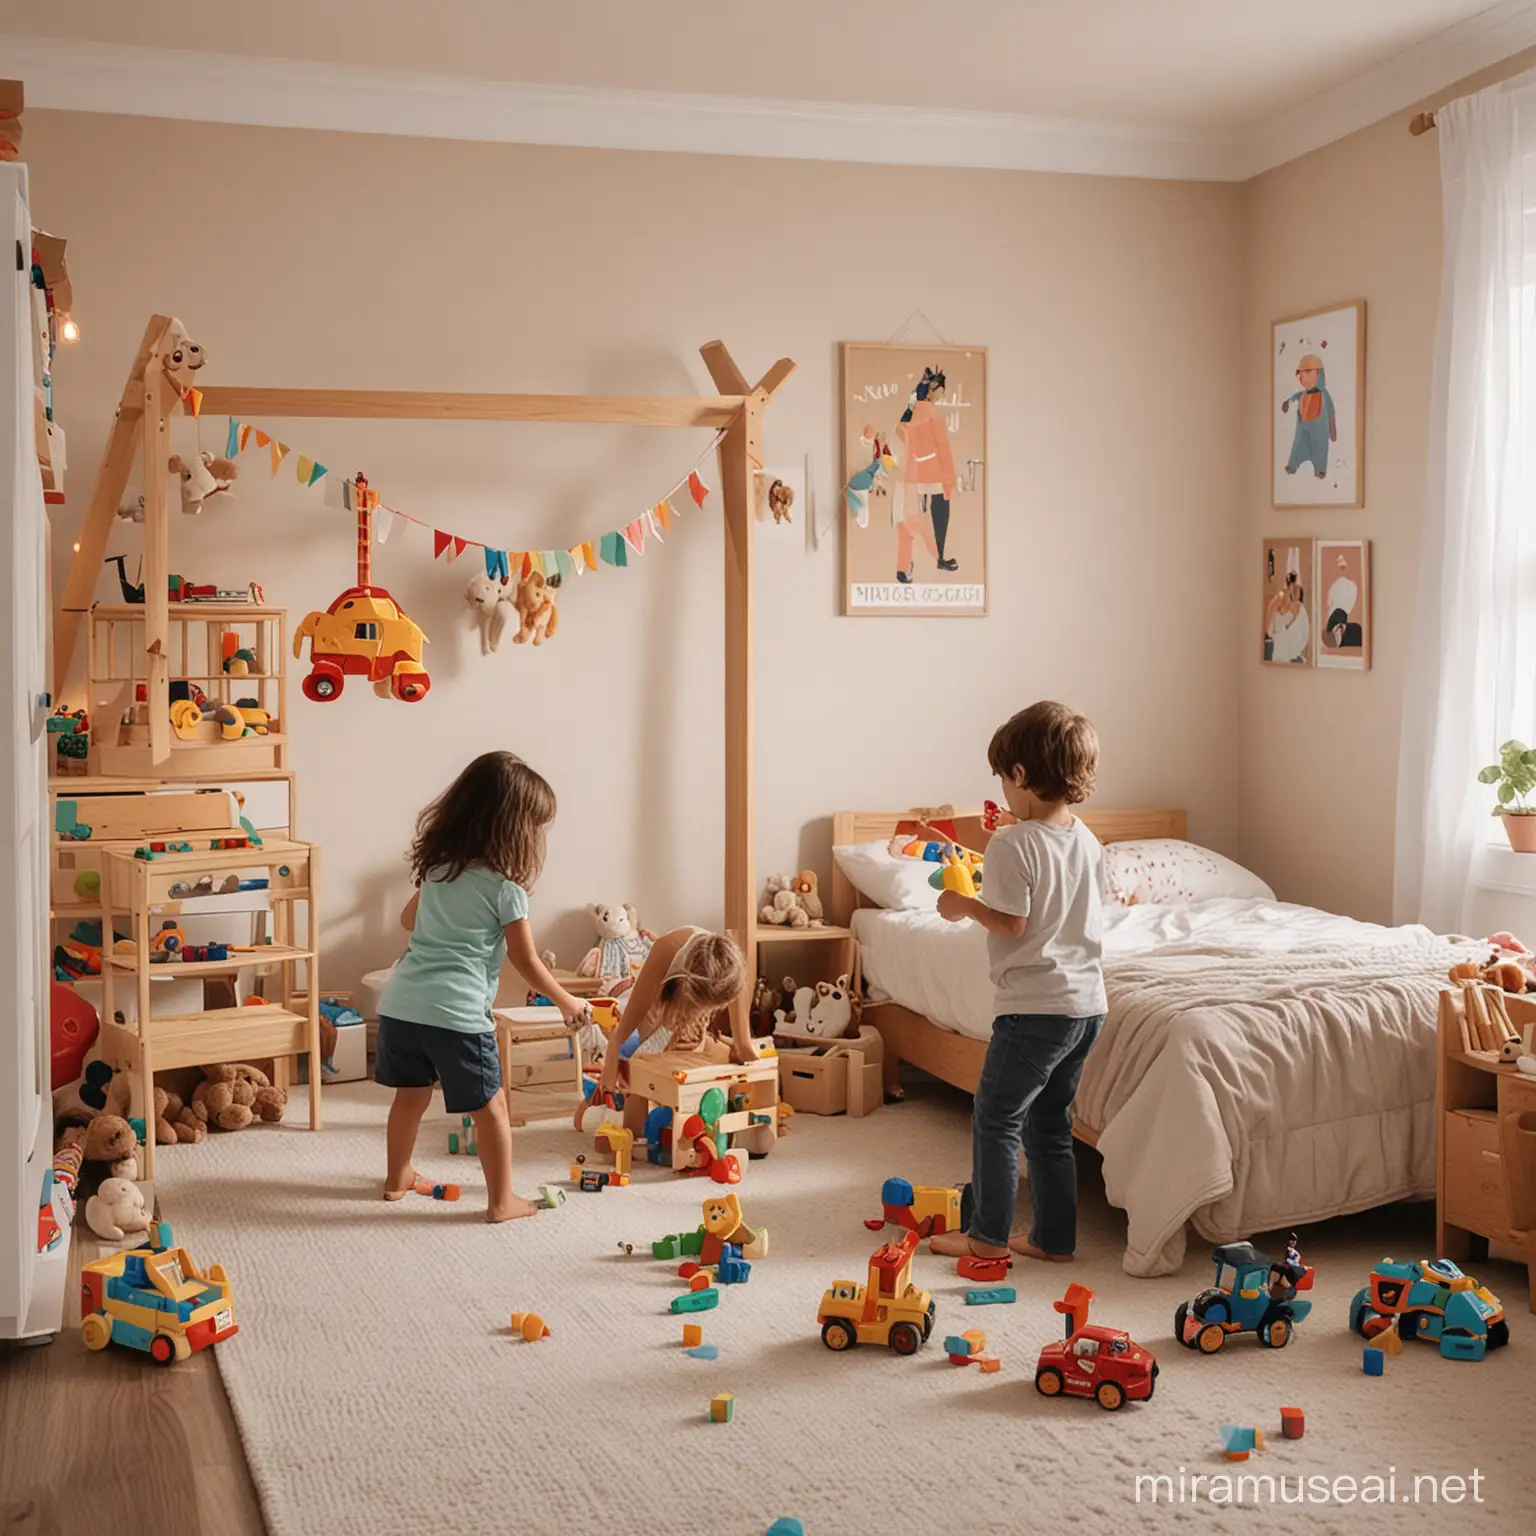 Children Engaged in Imaginative Play with Toys in Bedroom